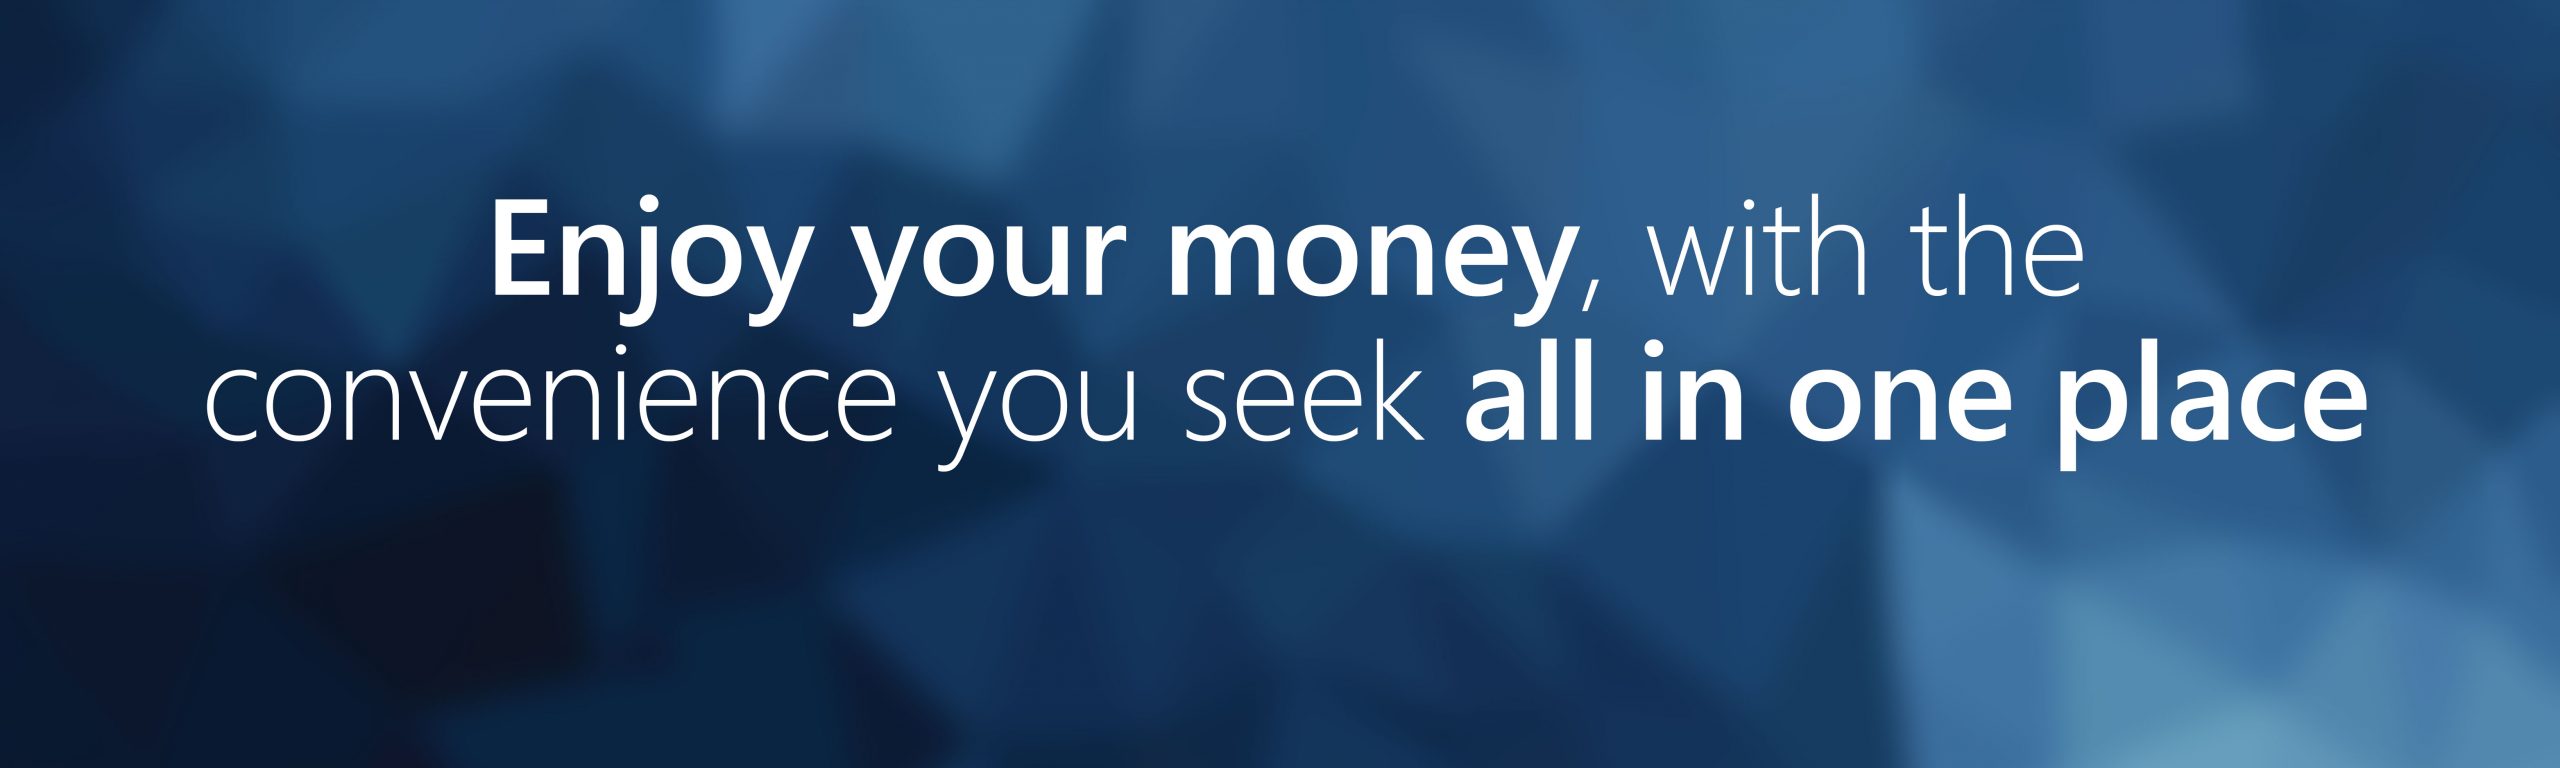 Enjoy your money, with the convenience you seek all in one place